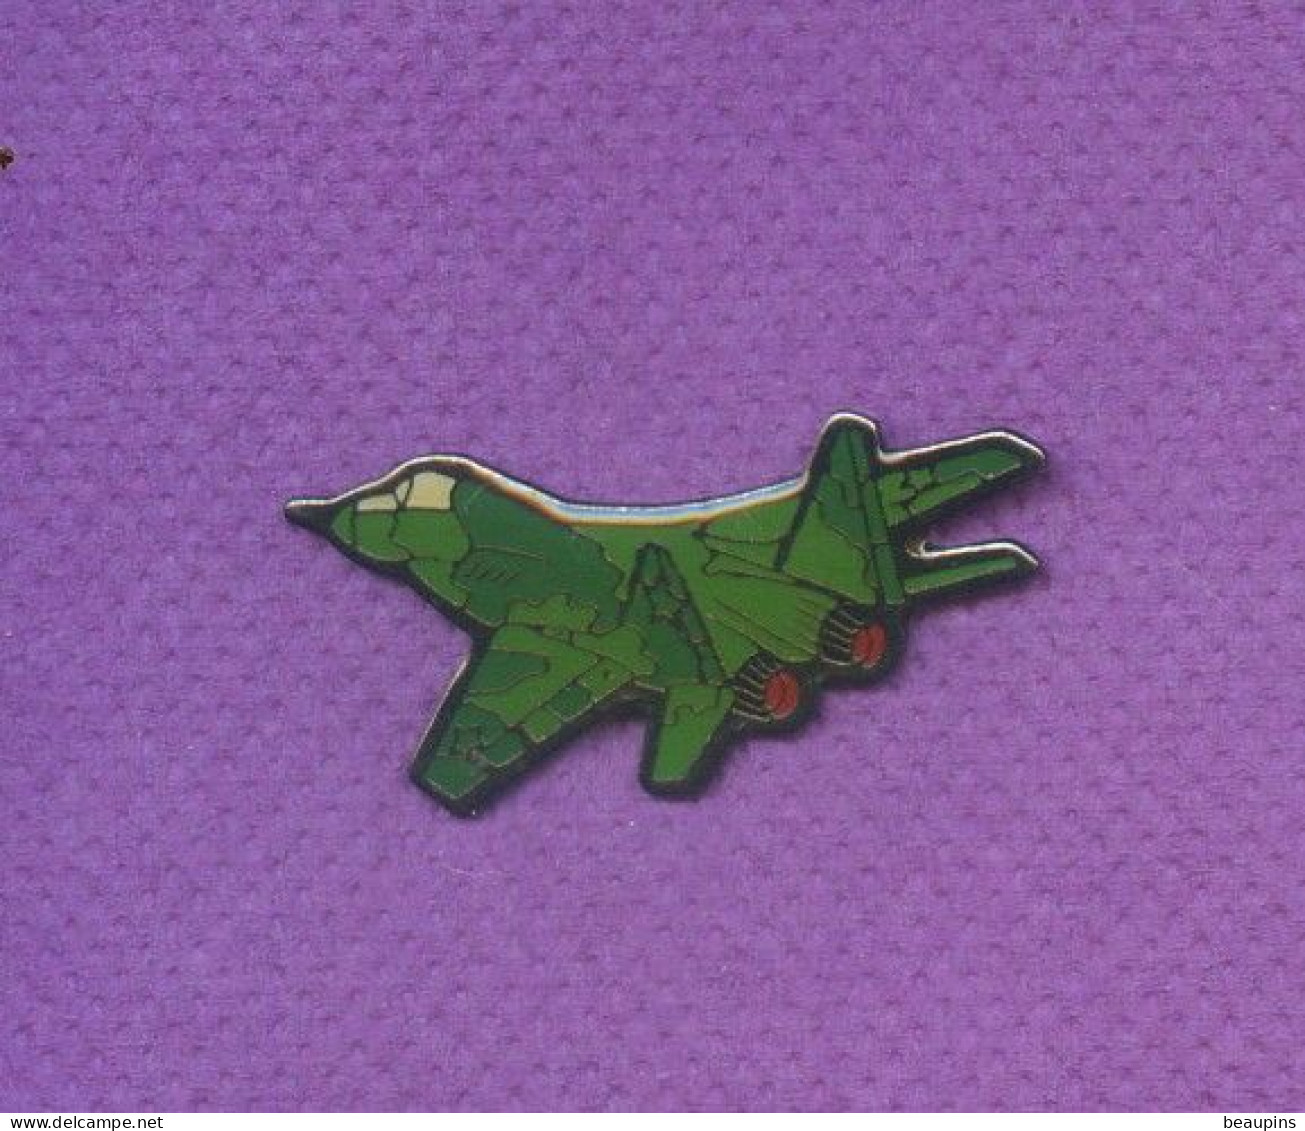 Rare Pins Avion De Chasse Militaire Armee N297 - Airplanes